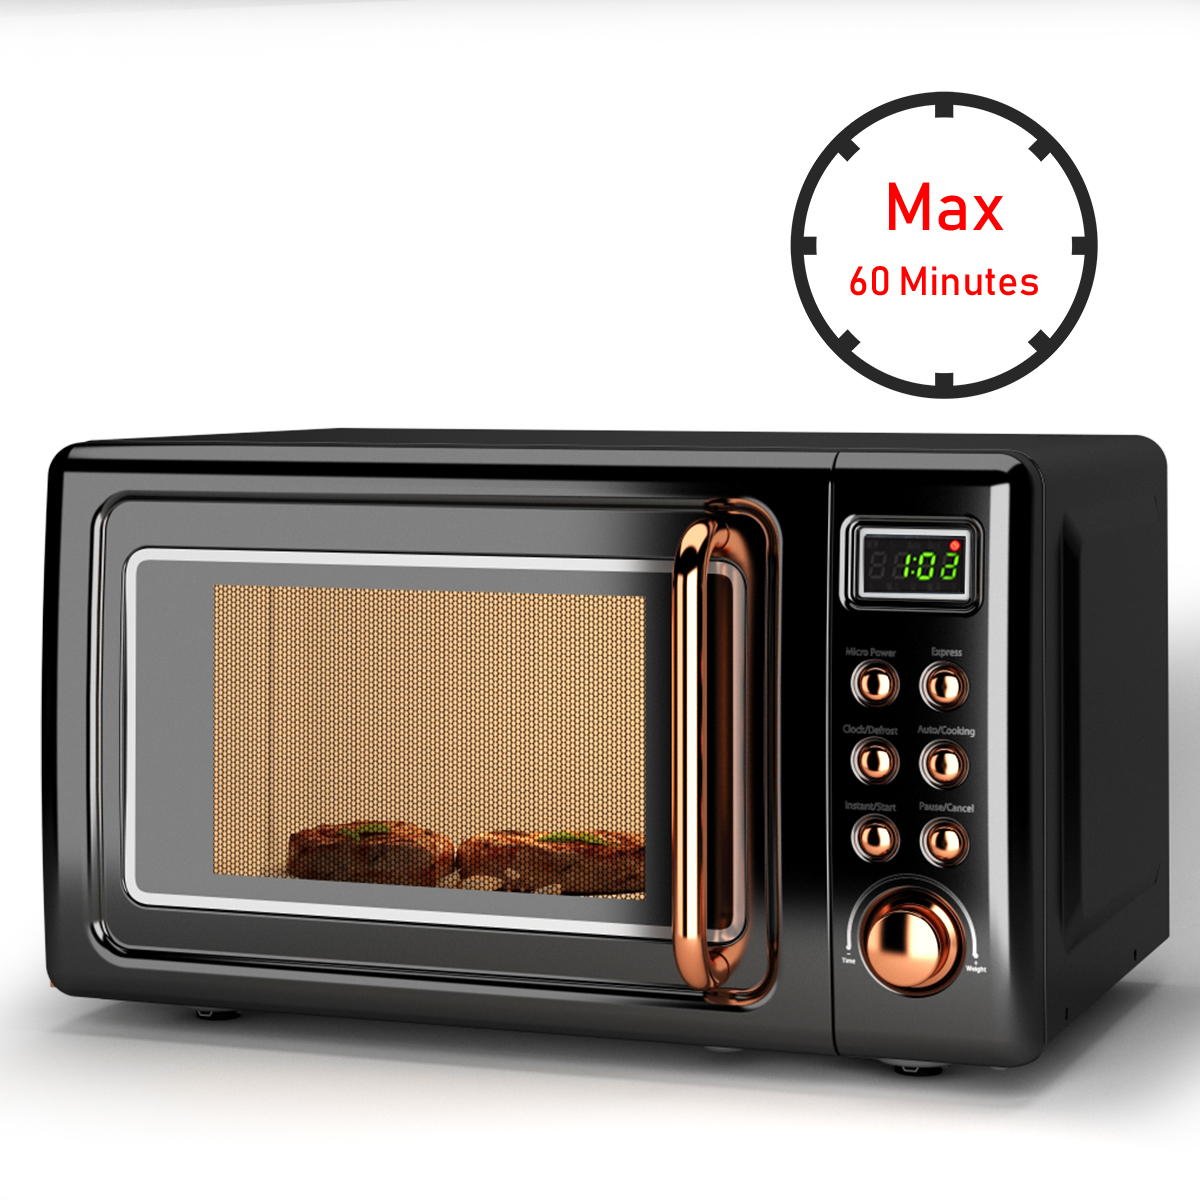 Costway 0.7Cu.ft Retro Countertop Microwave Oven 700W LED Display Glass Turntable Rose Gold - image 5 of 10